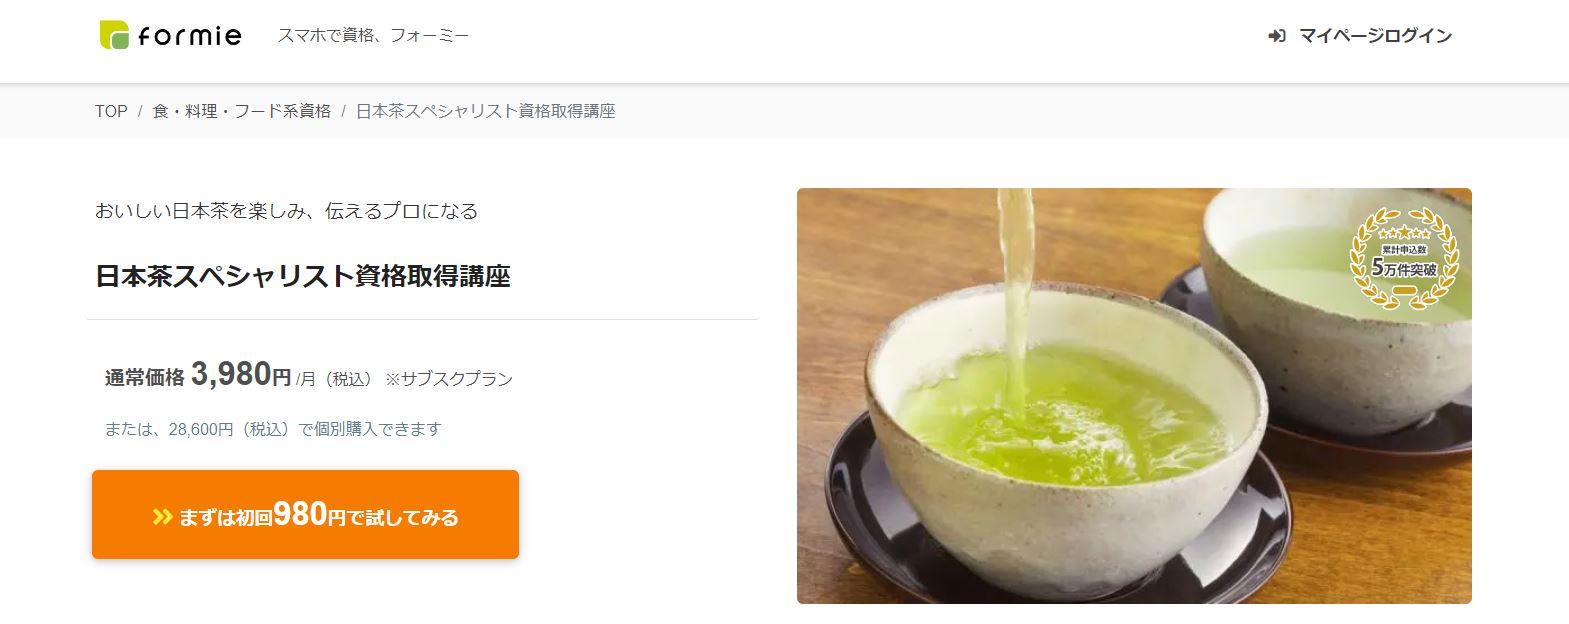 formie日本茶